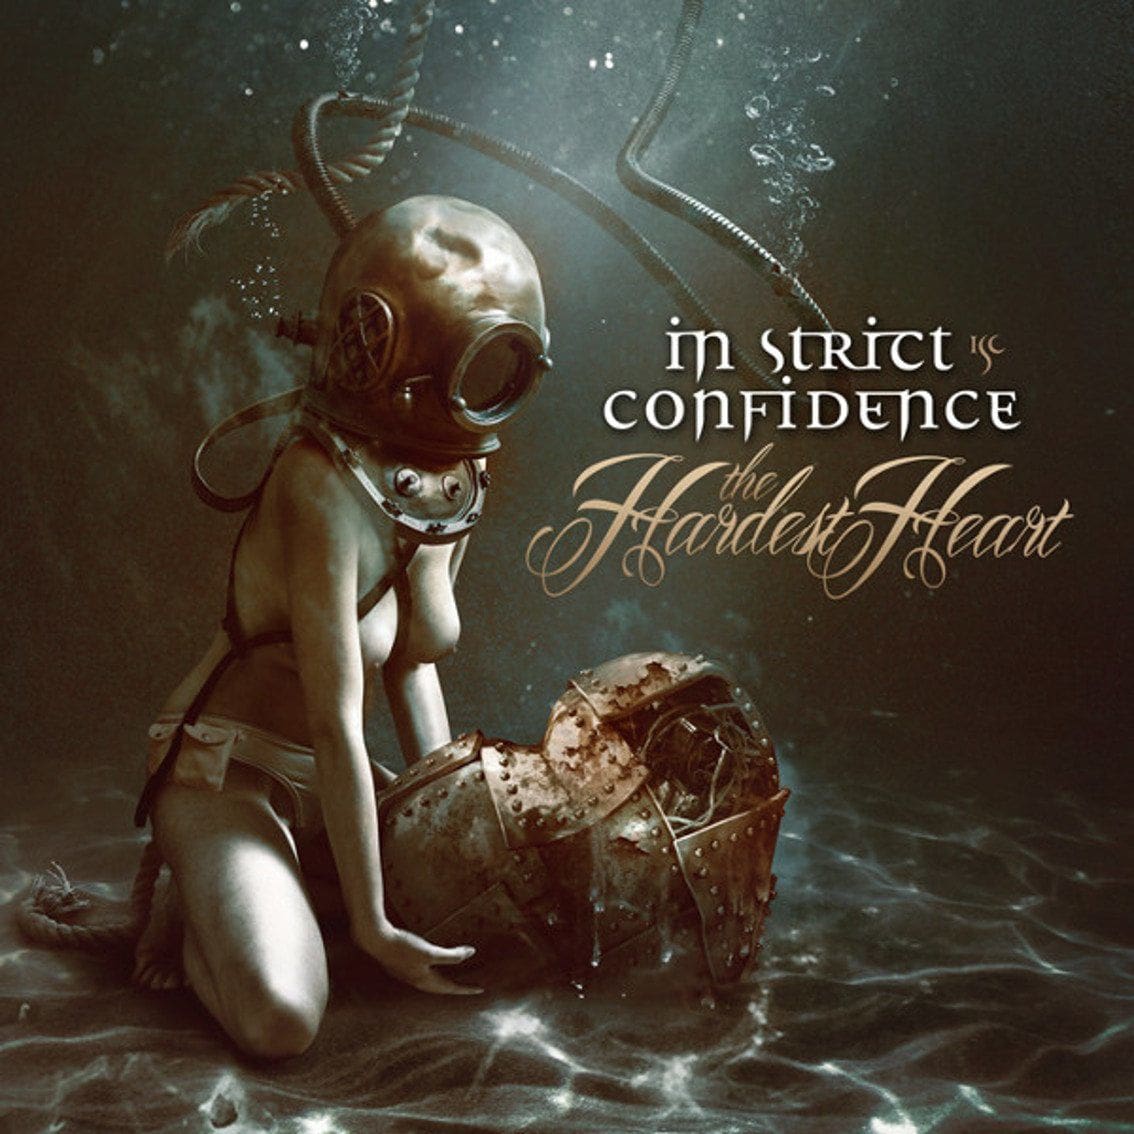 New album In Strict Confidence,'The hardest heart', available in 3 formats - order your limited edition copies here